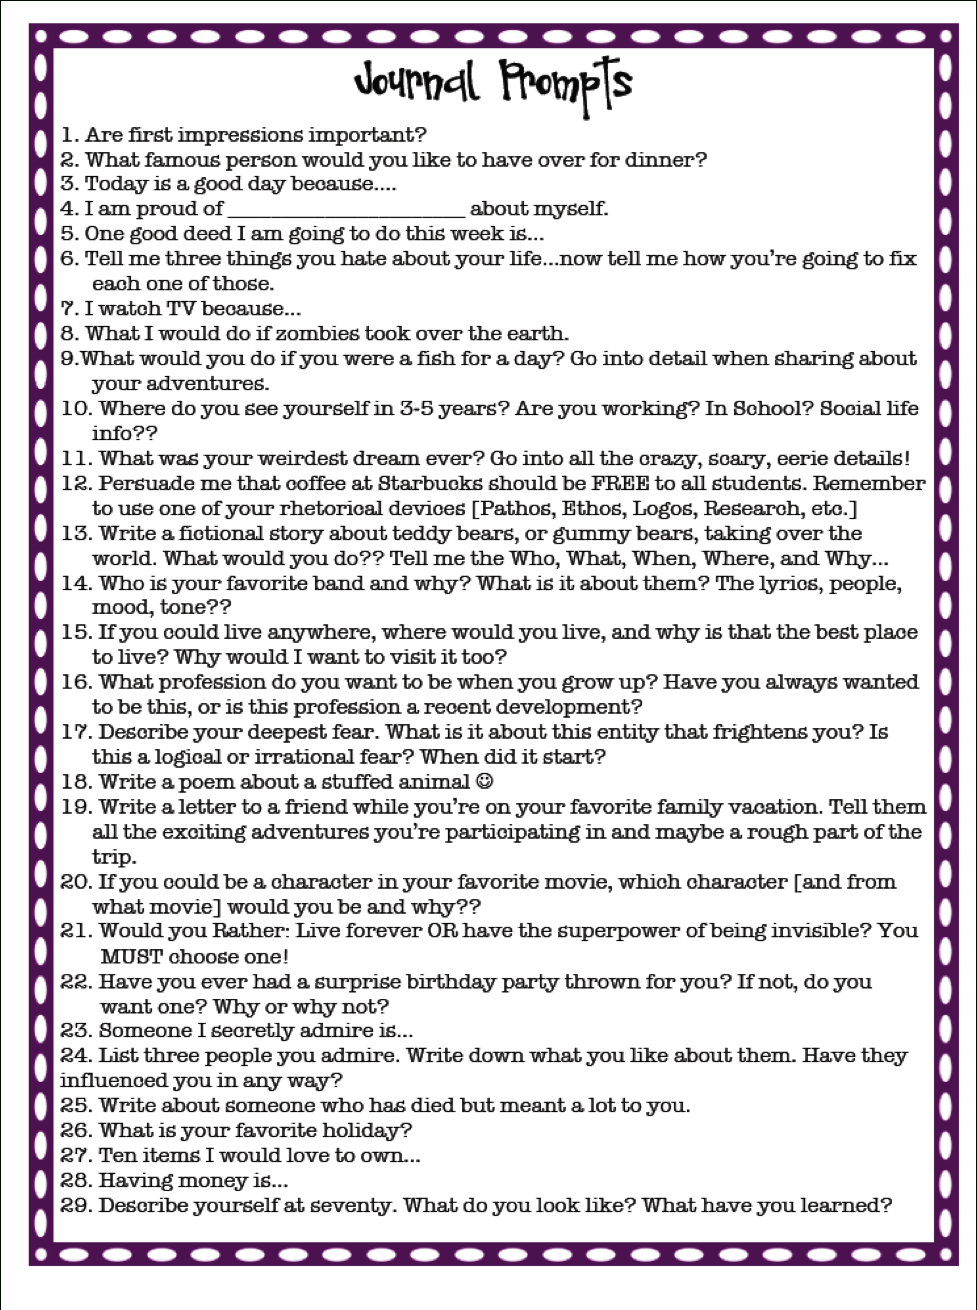 Journal Prompts For High School/middle School. Free Printable - Free Printable Writing Prompts For Middle School